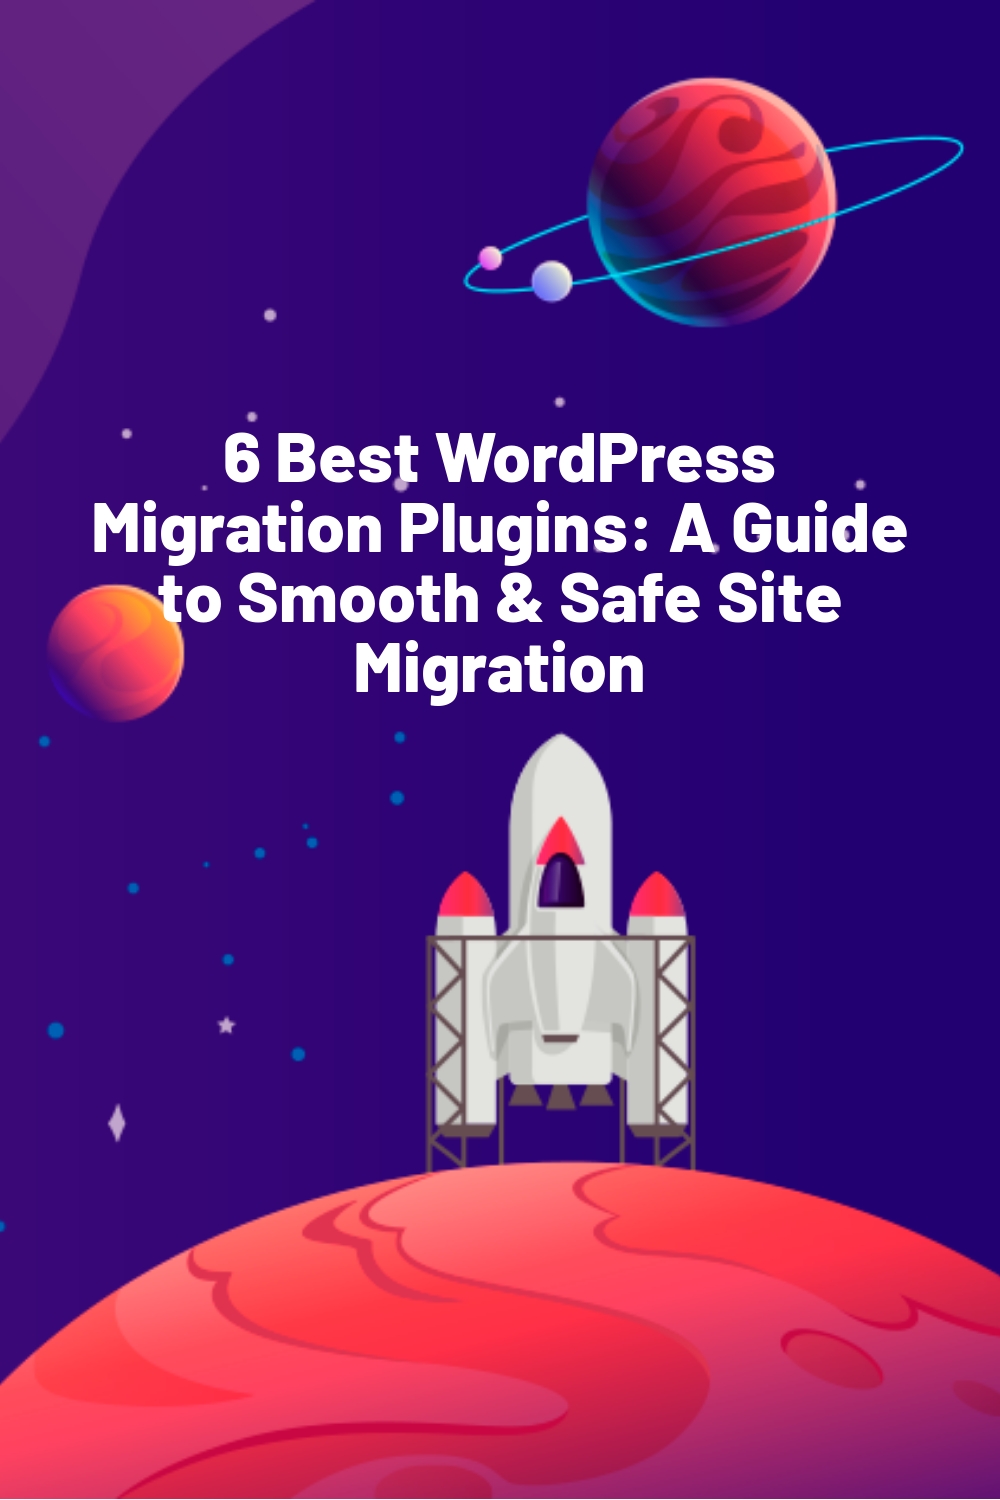 6 Best WordPress Migration Plugins: A Guide to Smooth & Safe Site Migration